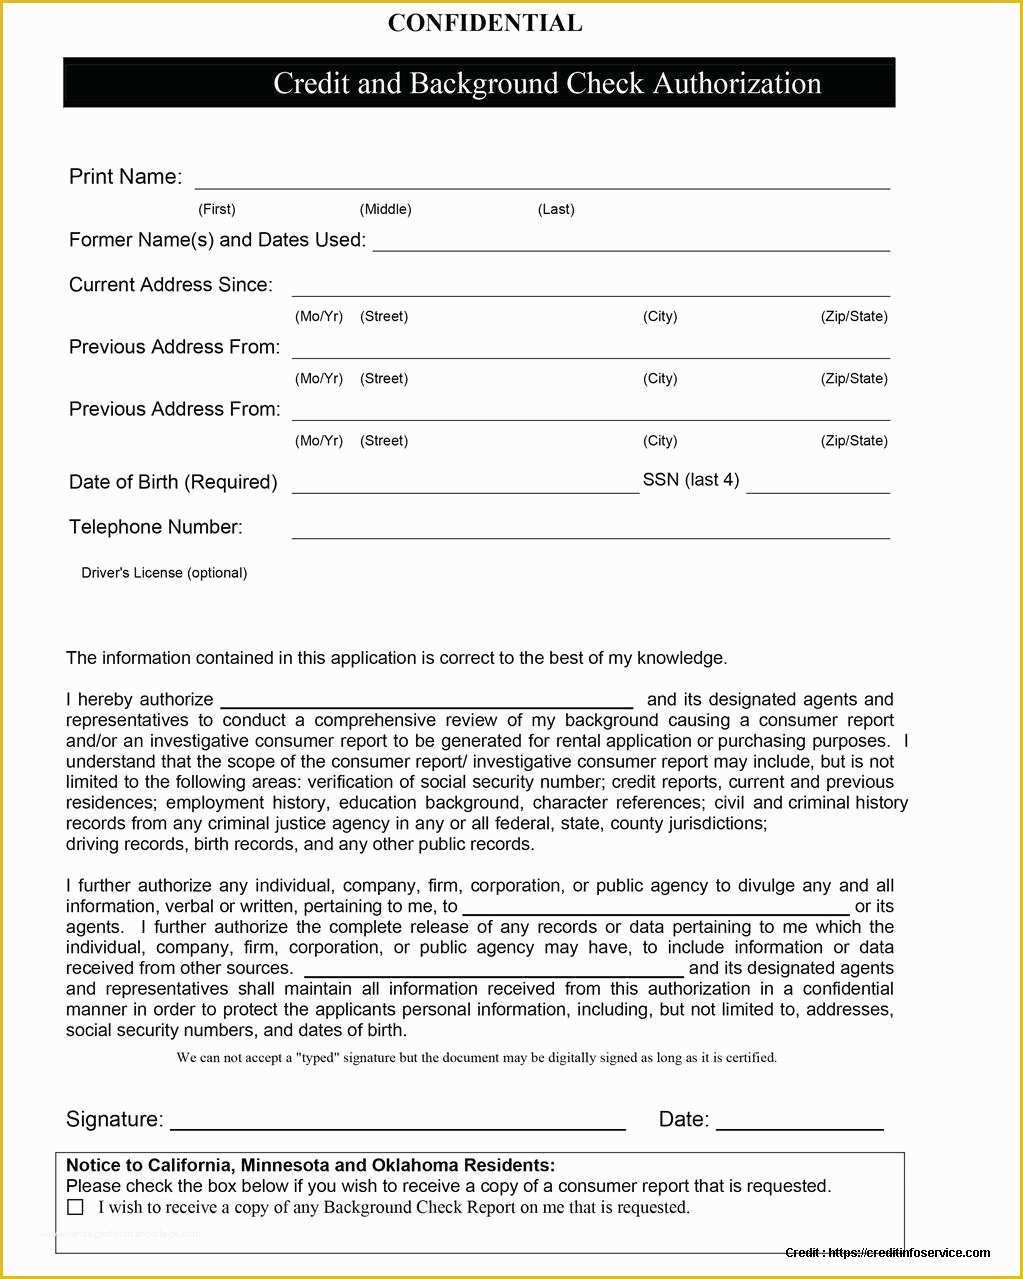 Background Check form Template Free Of Credit Check Authorization form Landlord form Resume